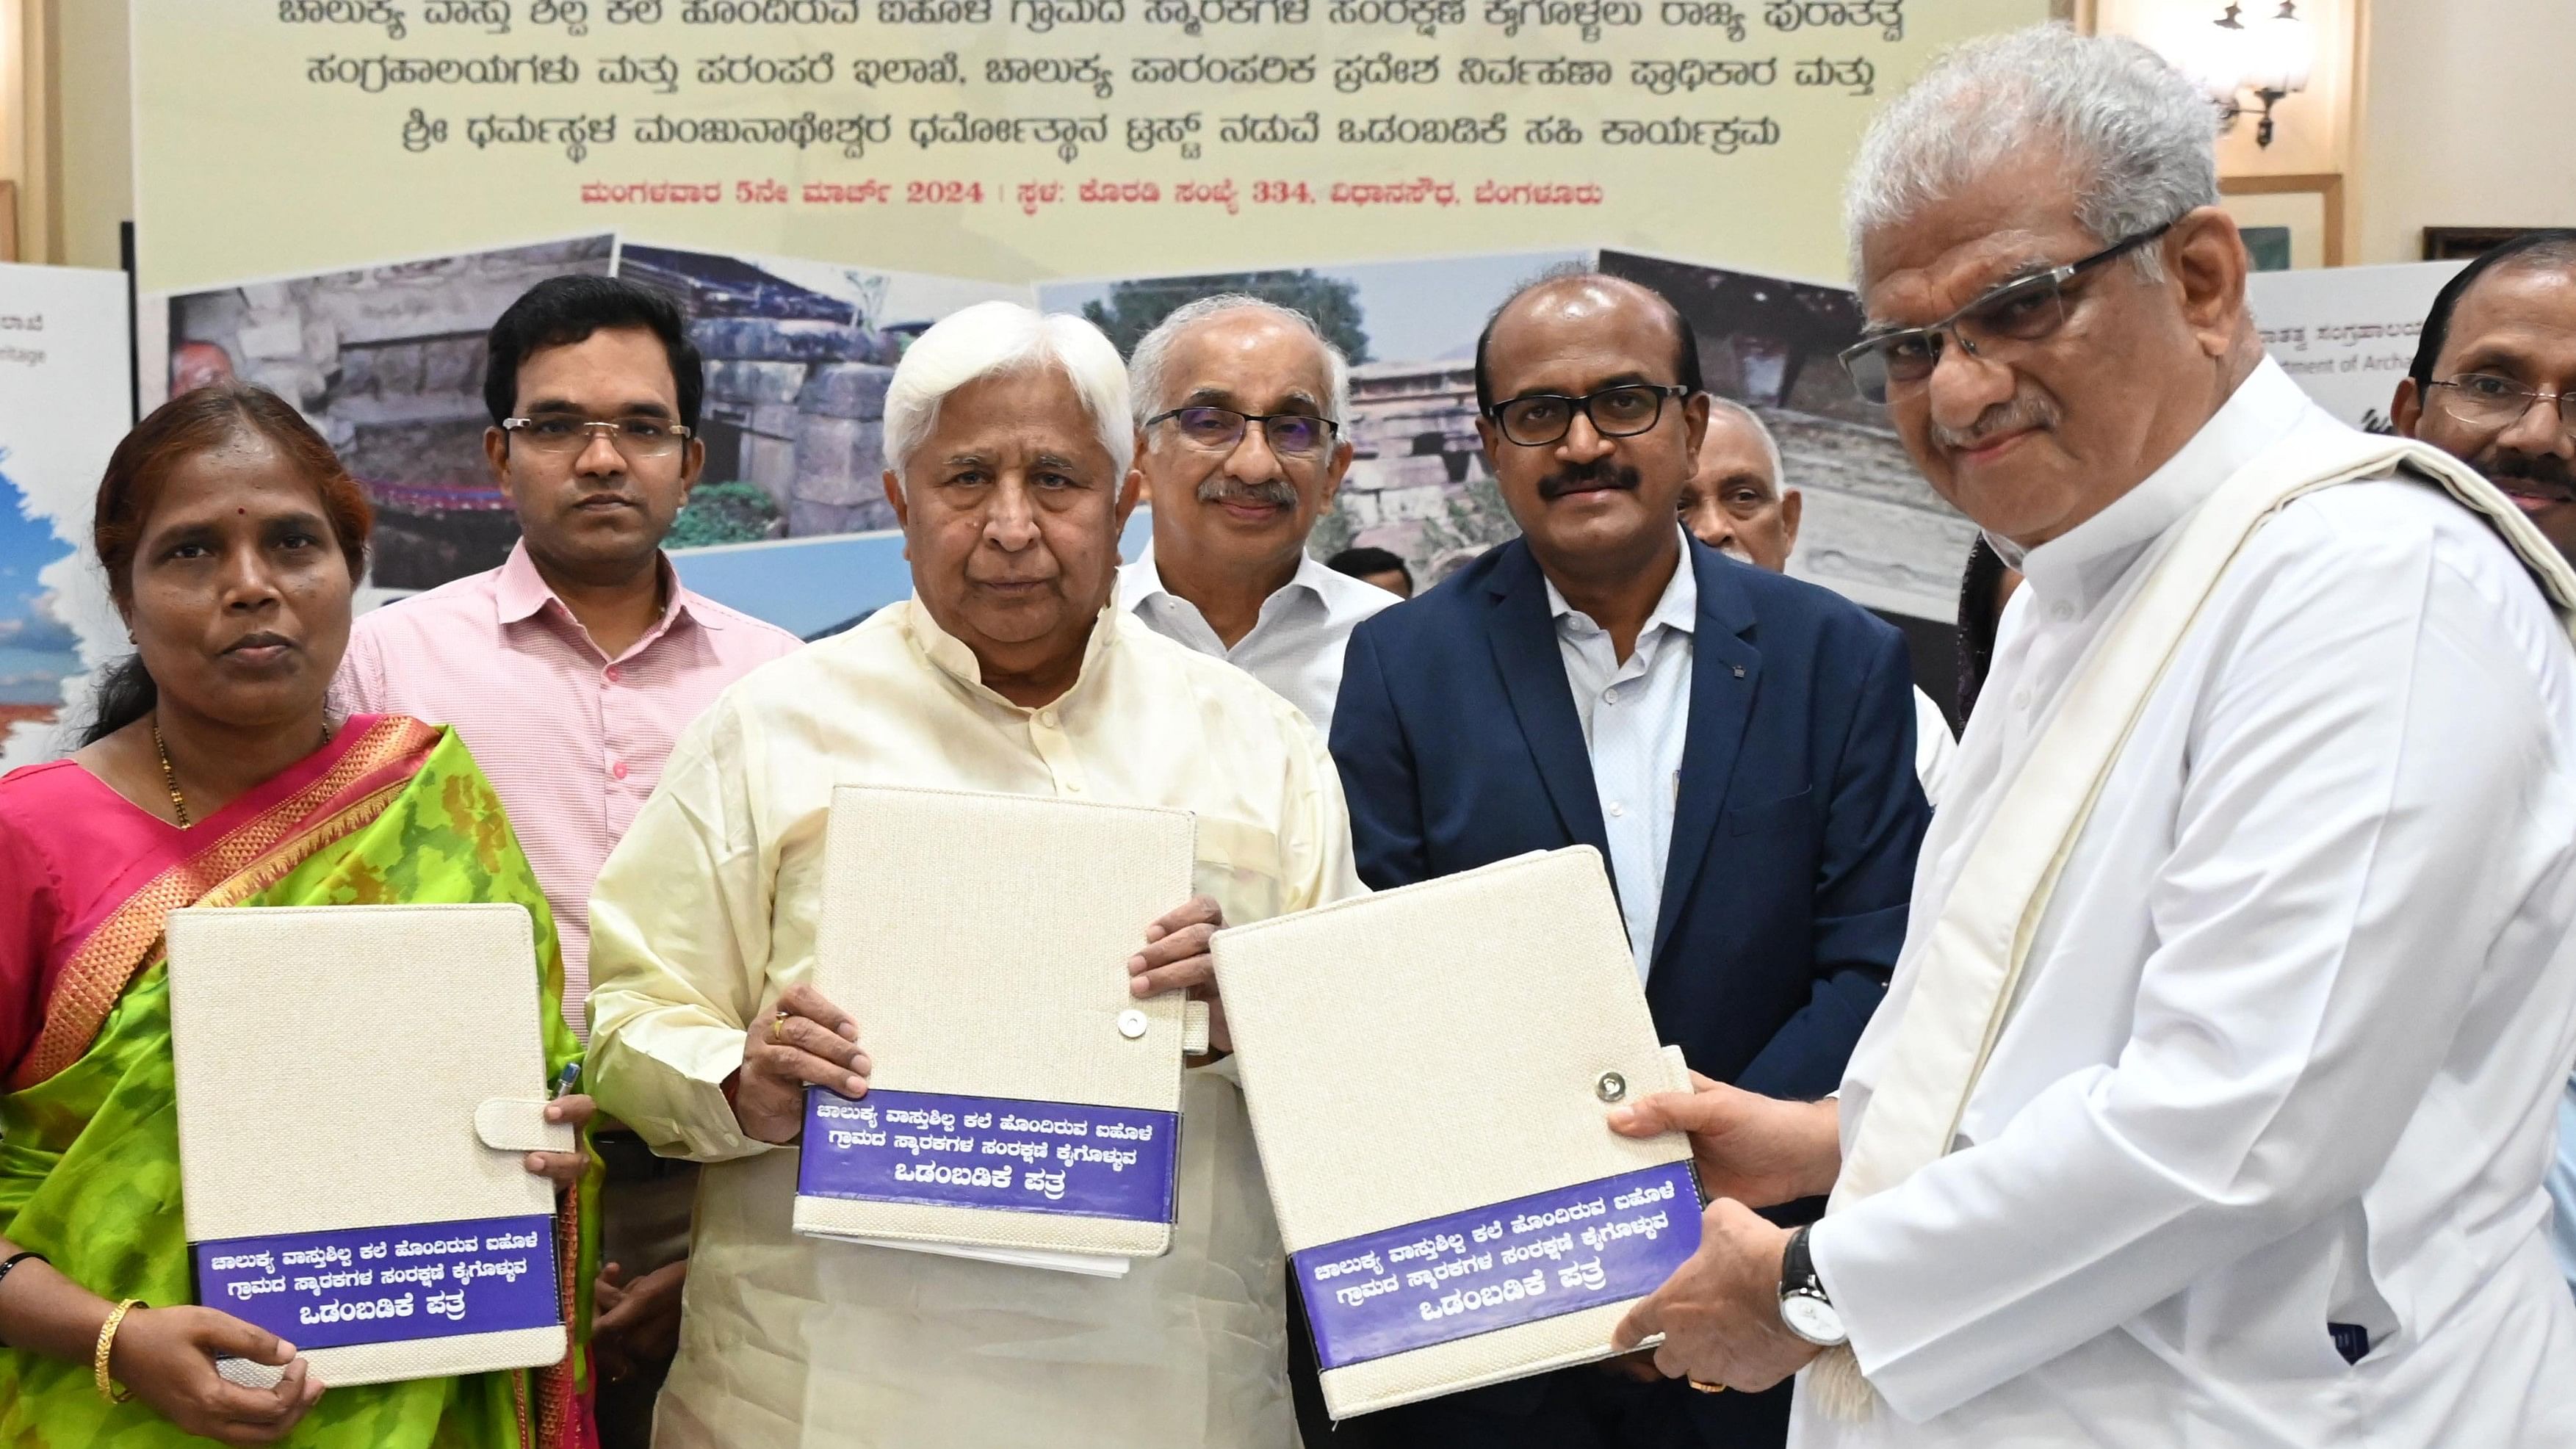 <div class="paragraphs"><p>Tourism Minister H K Patil and Dharmasthala Dharmadhikari Veerendra Heggade at the signing of a memorandum of understanding between&nbsp;Department of Archaeology, Museums and Heritage and Dharmasthala Manjunatheshwara Dharmothana Trust for preservation of Aithole monuments, in Bengaluru on Tuesday.</p></div>